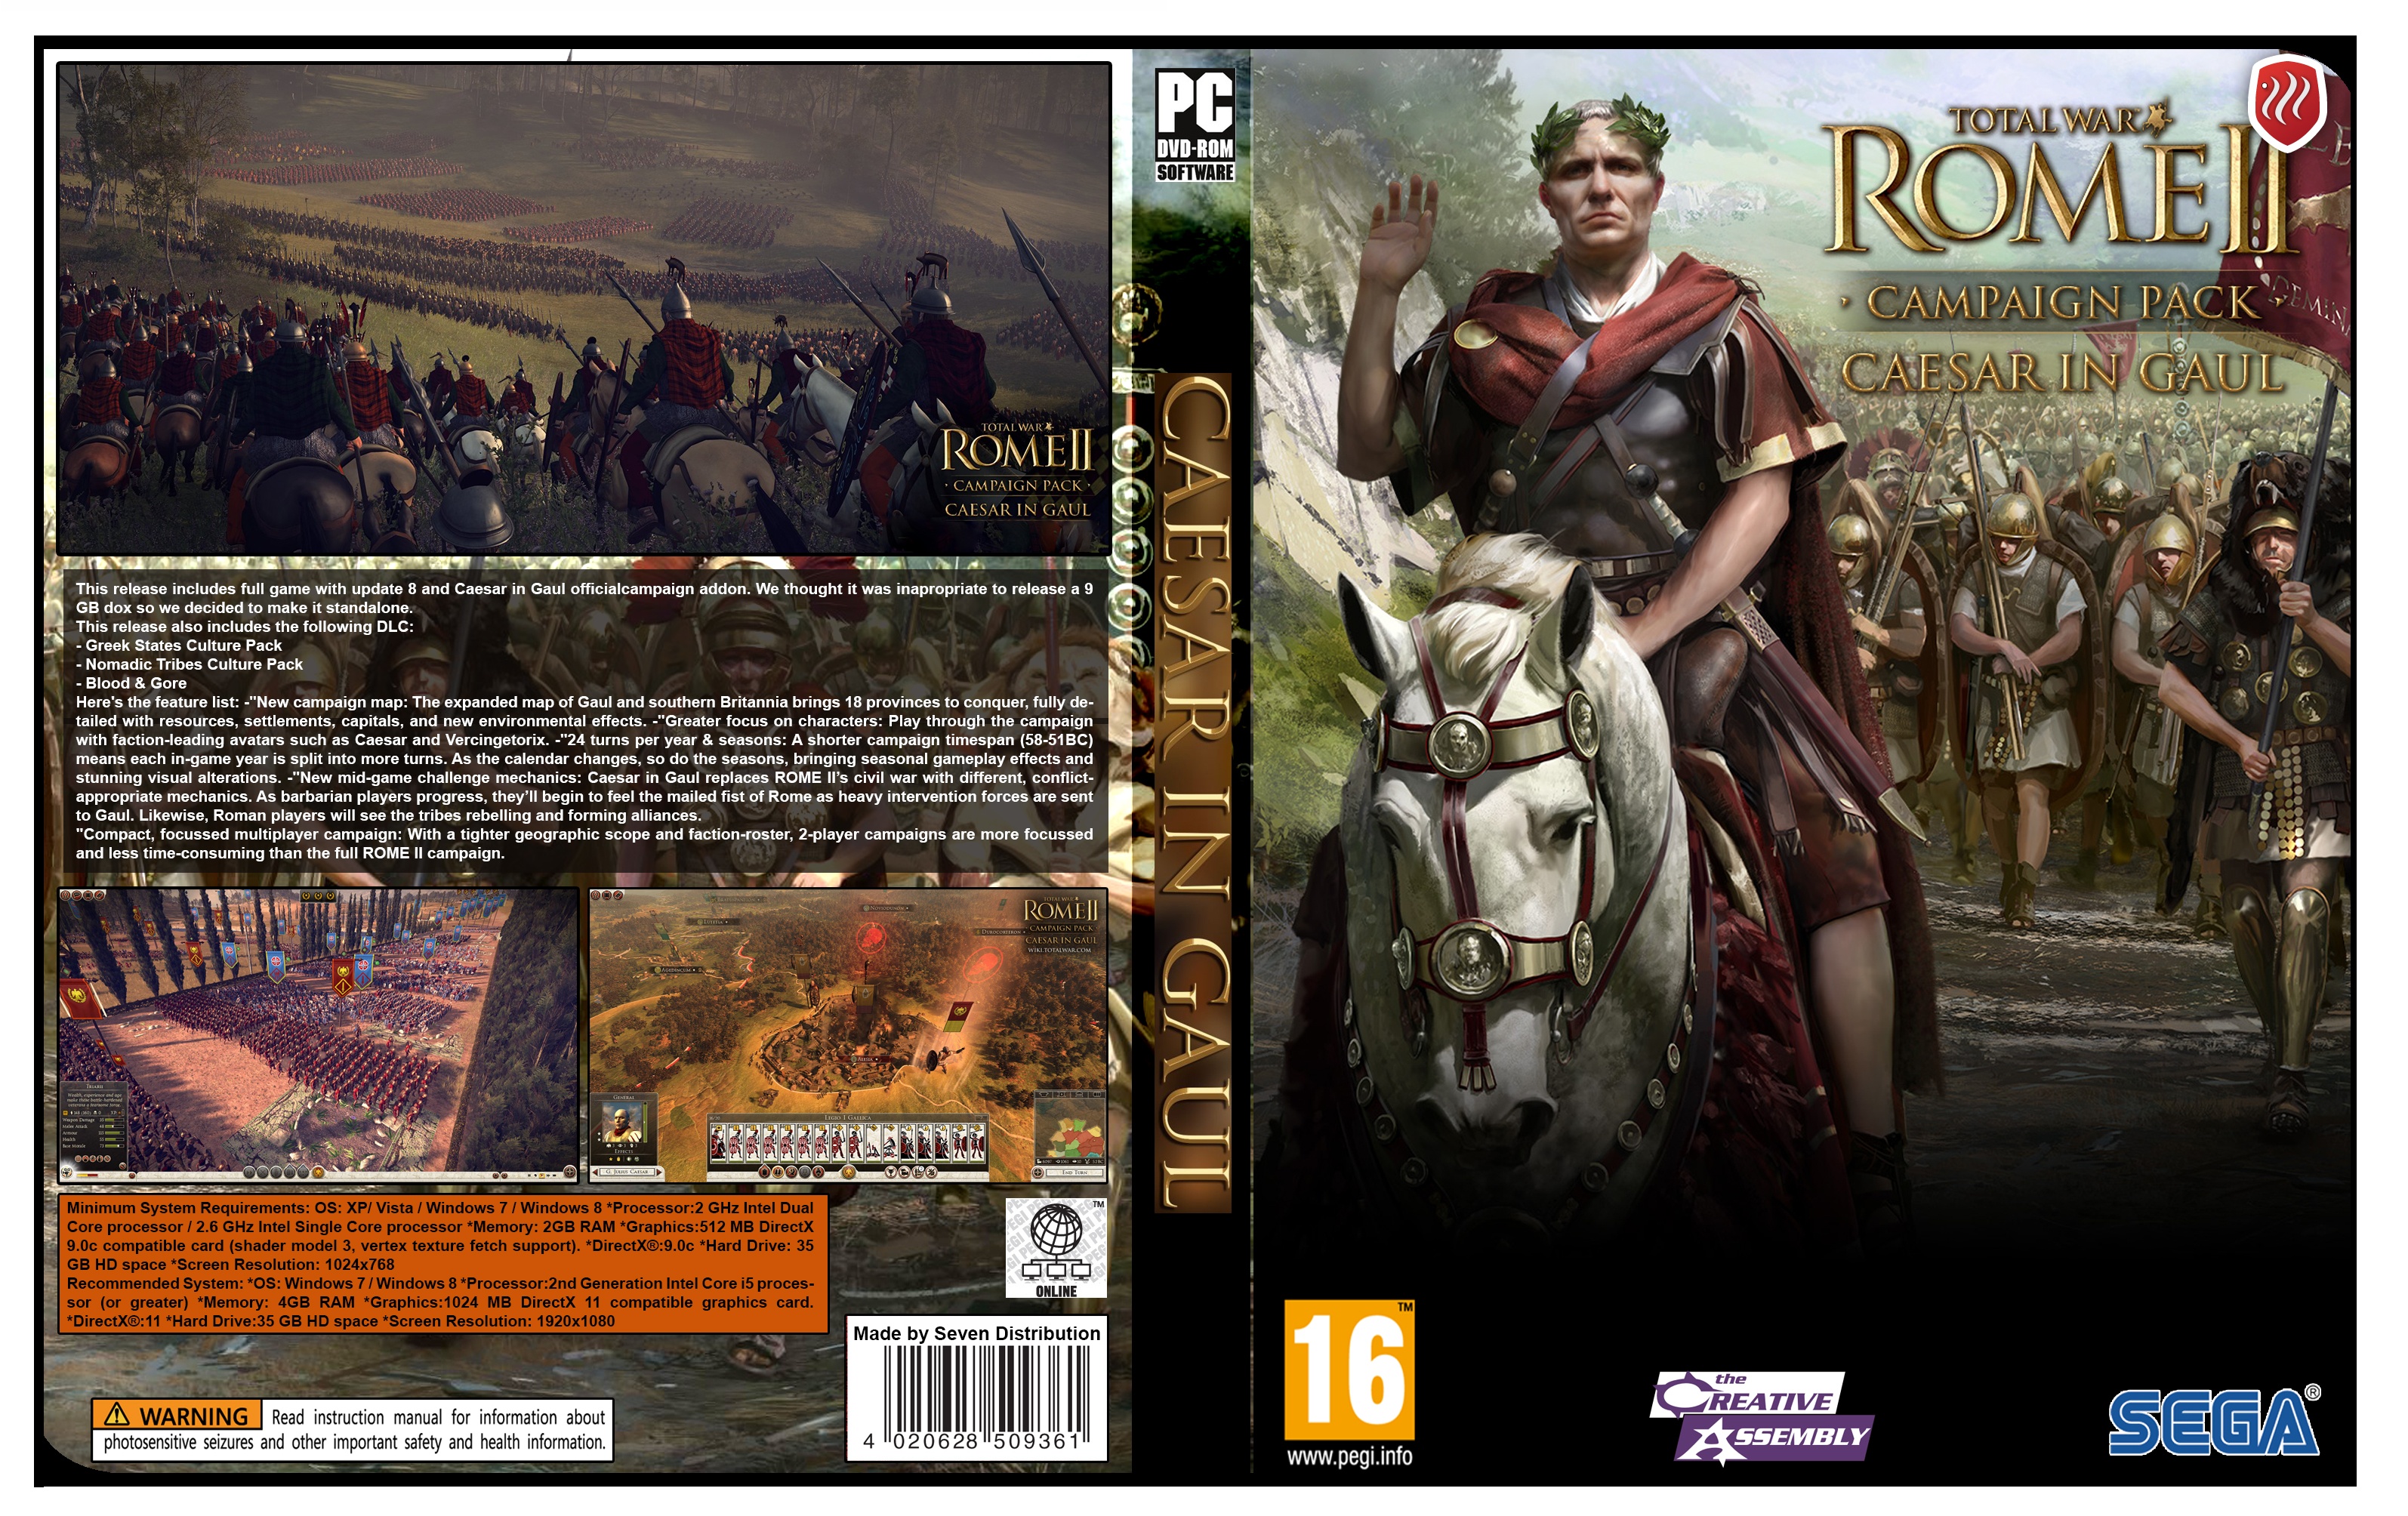 Rome II Ceasar in Gaul box cover